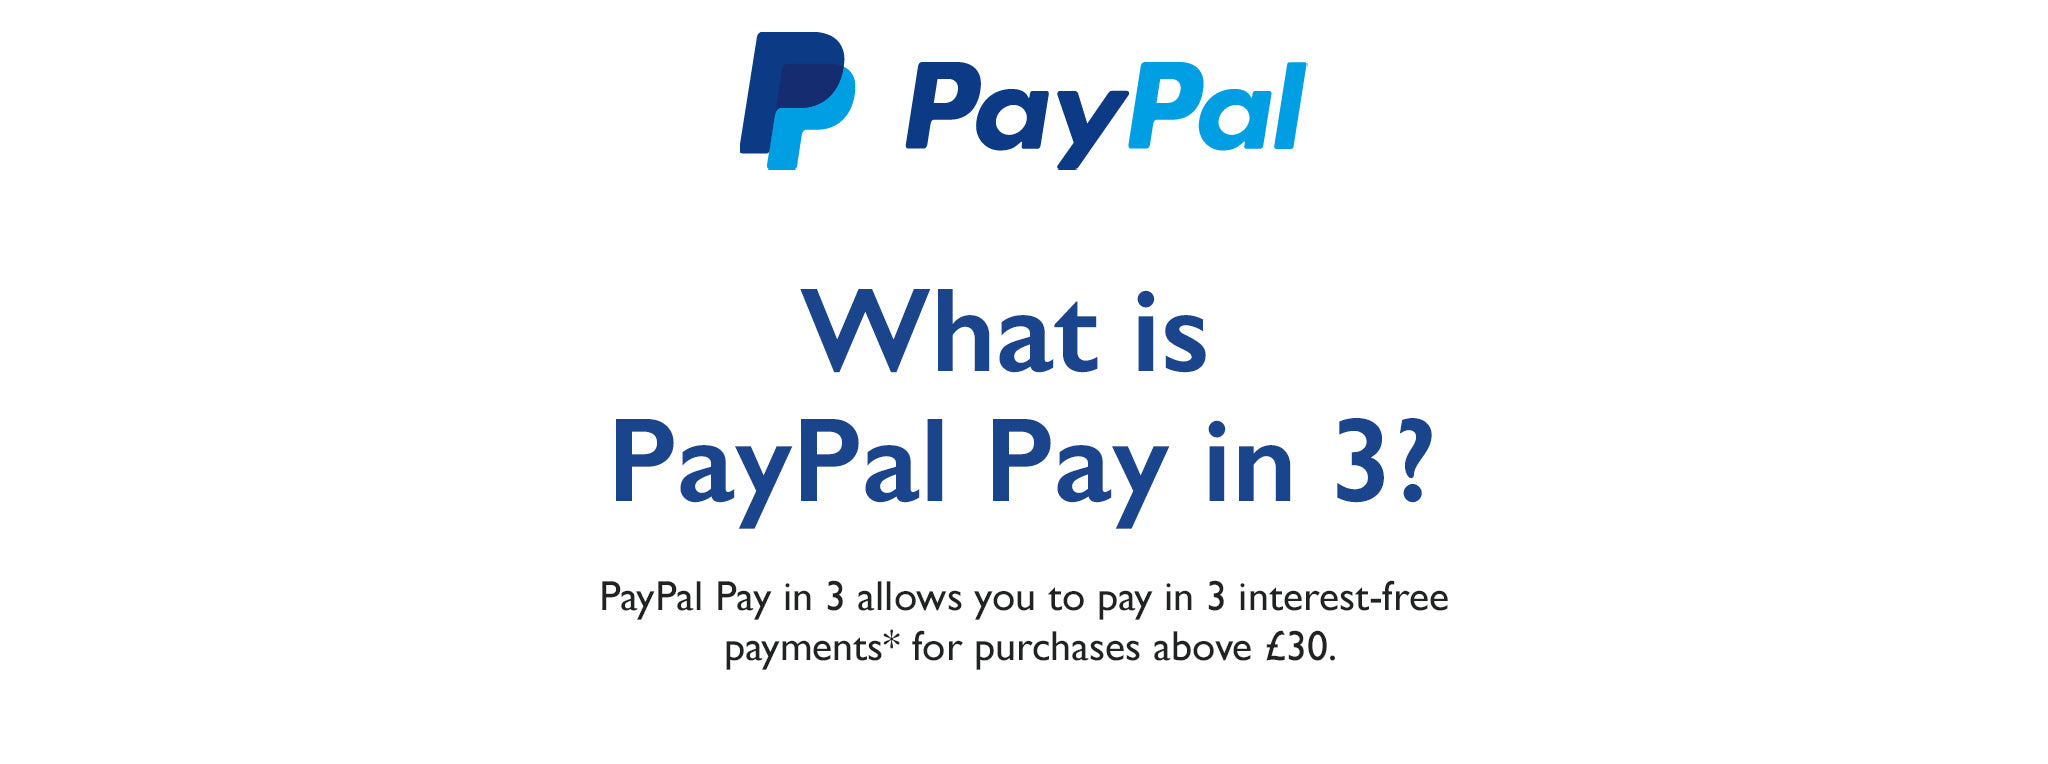 What is PayPal Pay in 3?